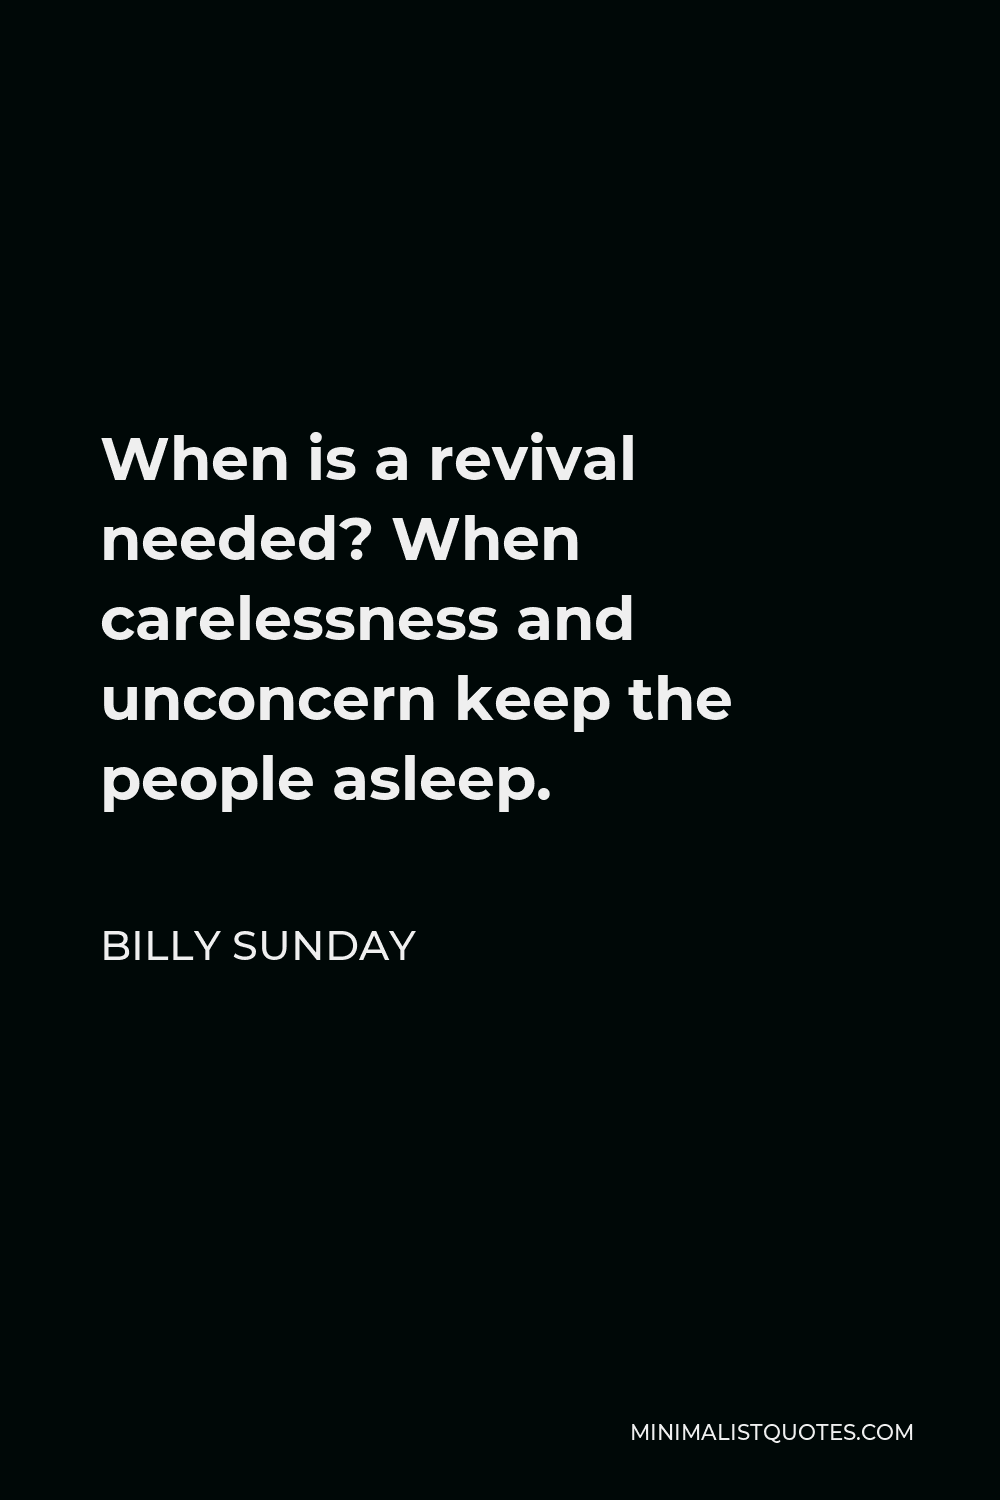 Billy Sunday Quote - When is a revival needed? When carelessness and unconcern keep the people asleep.